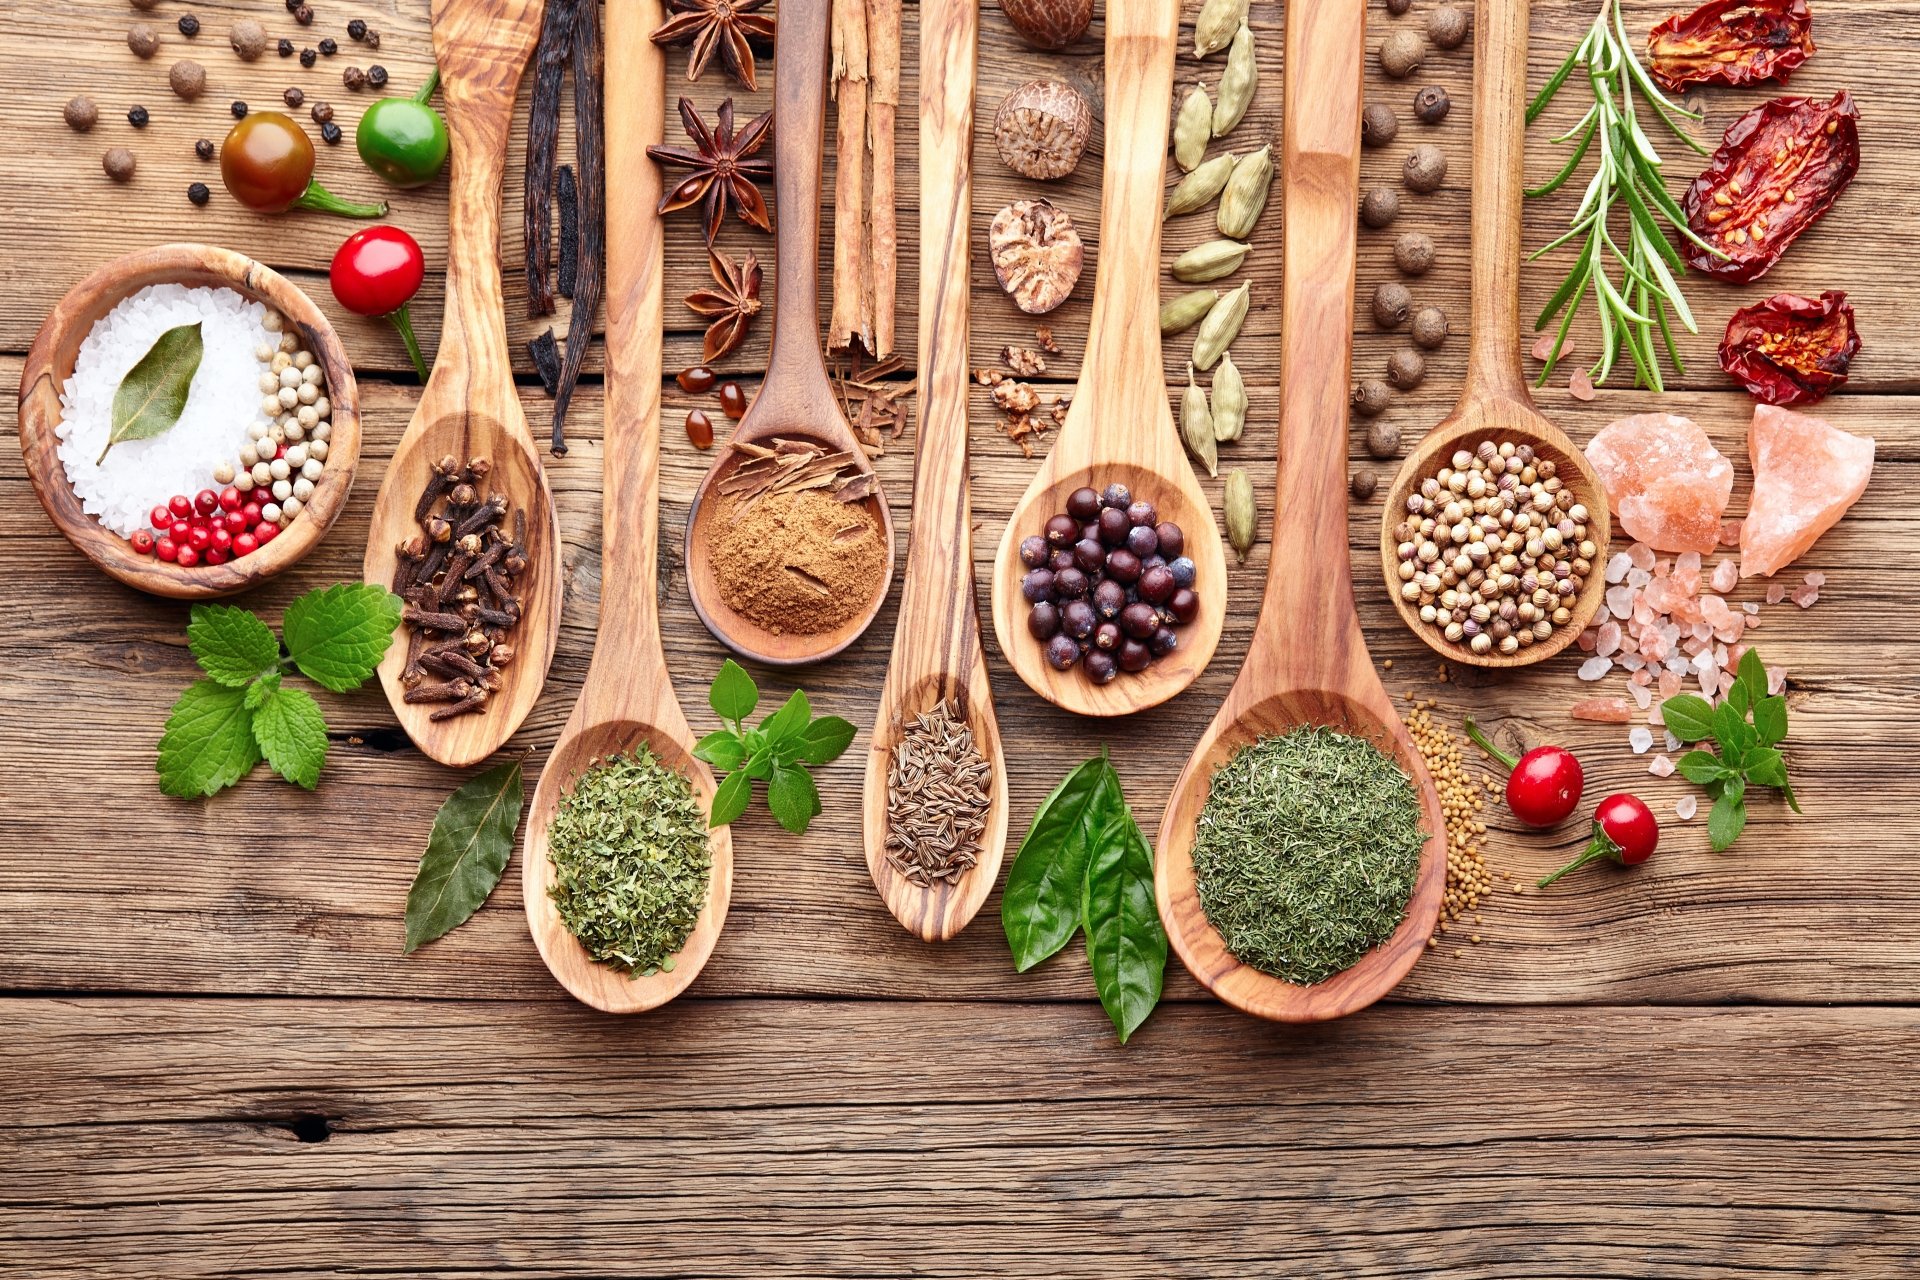 Herbs And Spices 4k Ultra HD Wallpaper | Background Image | 5432x3621